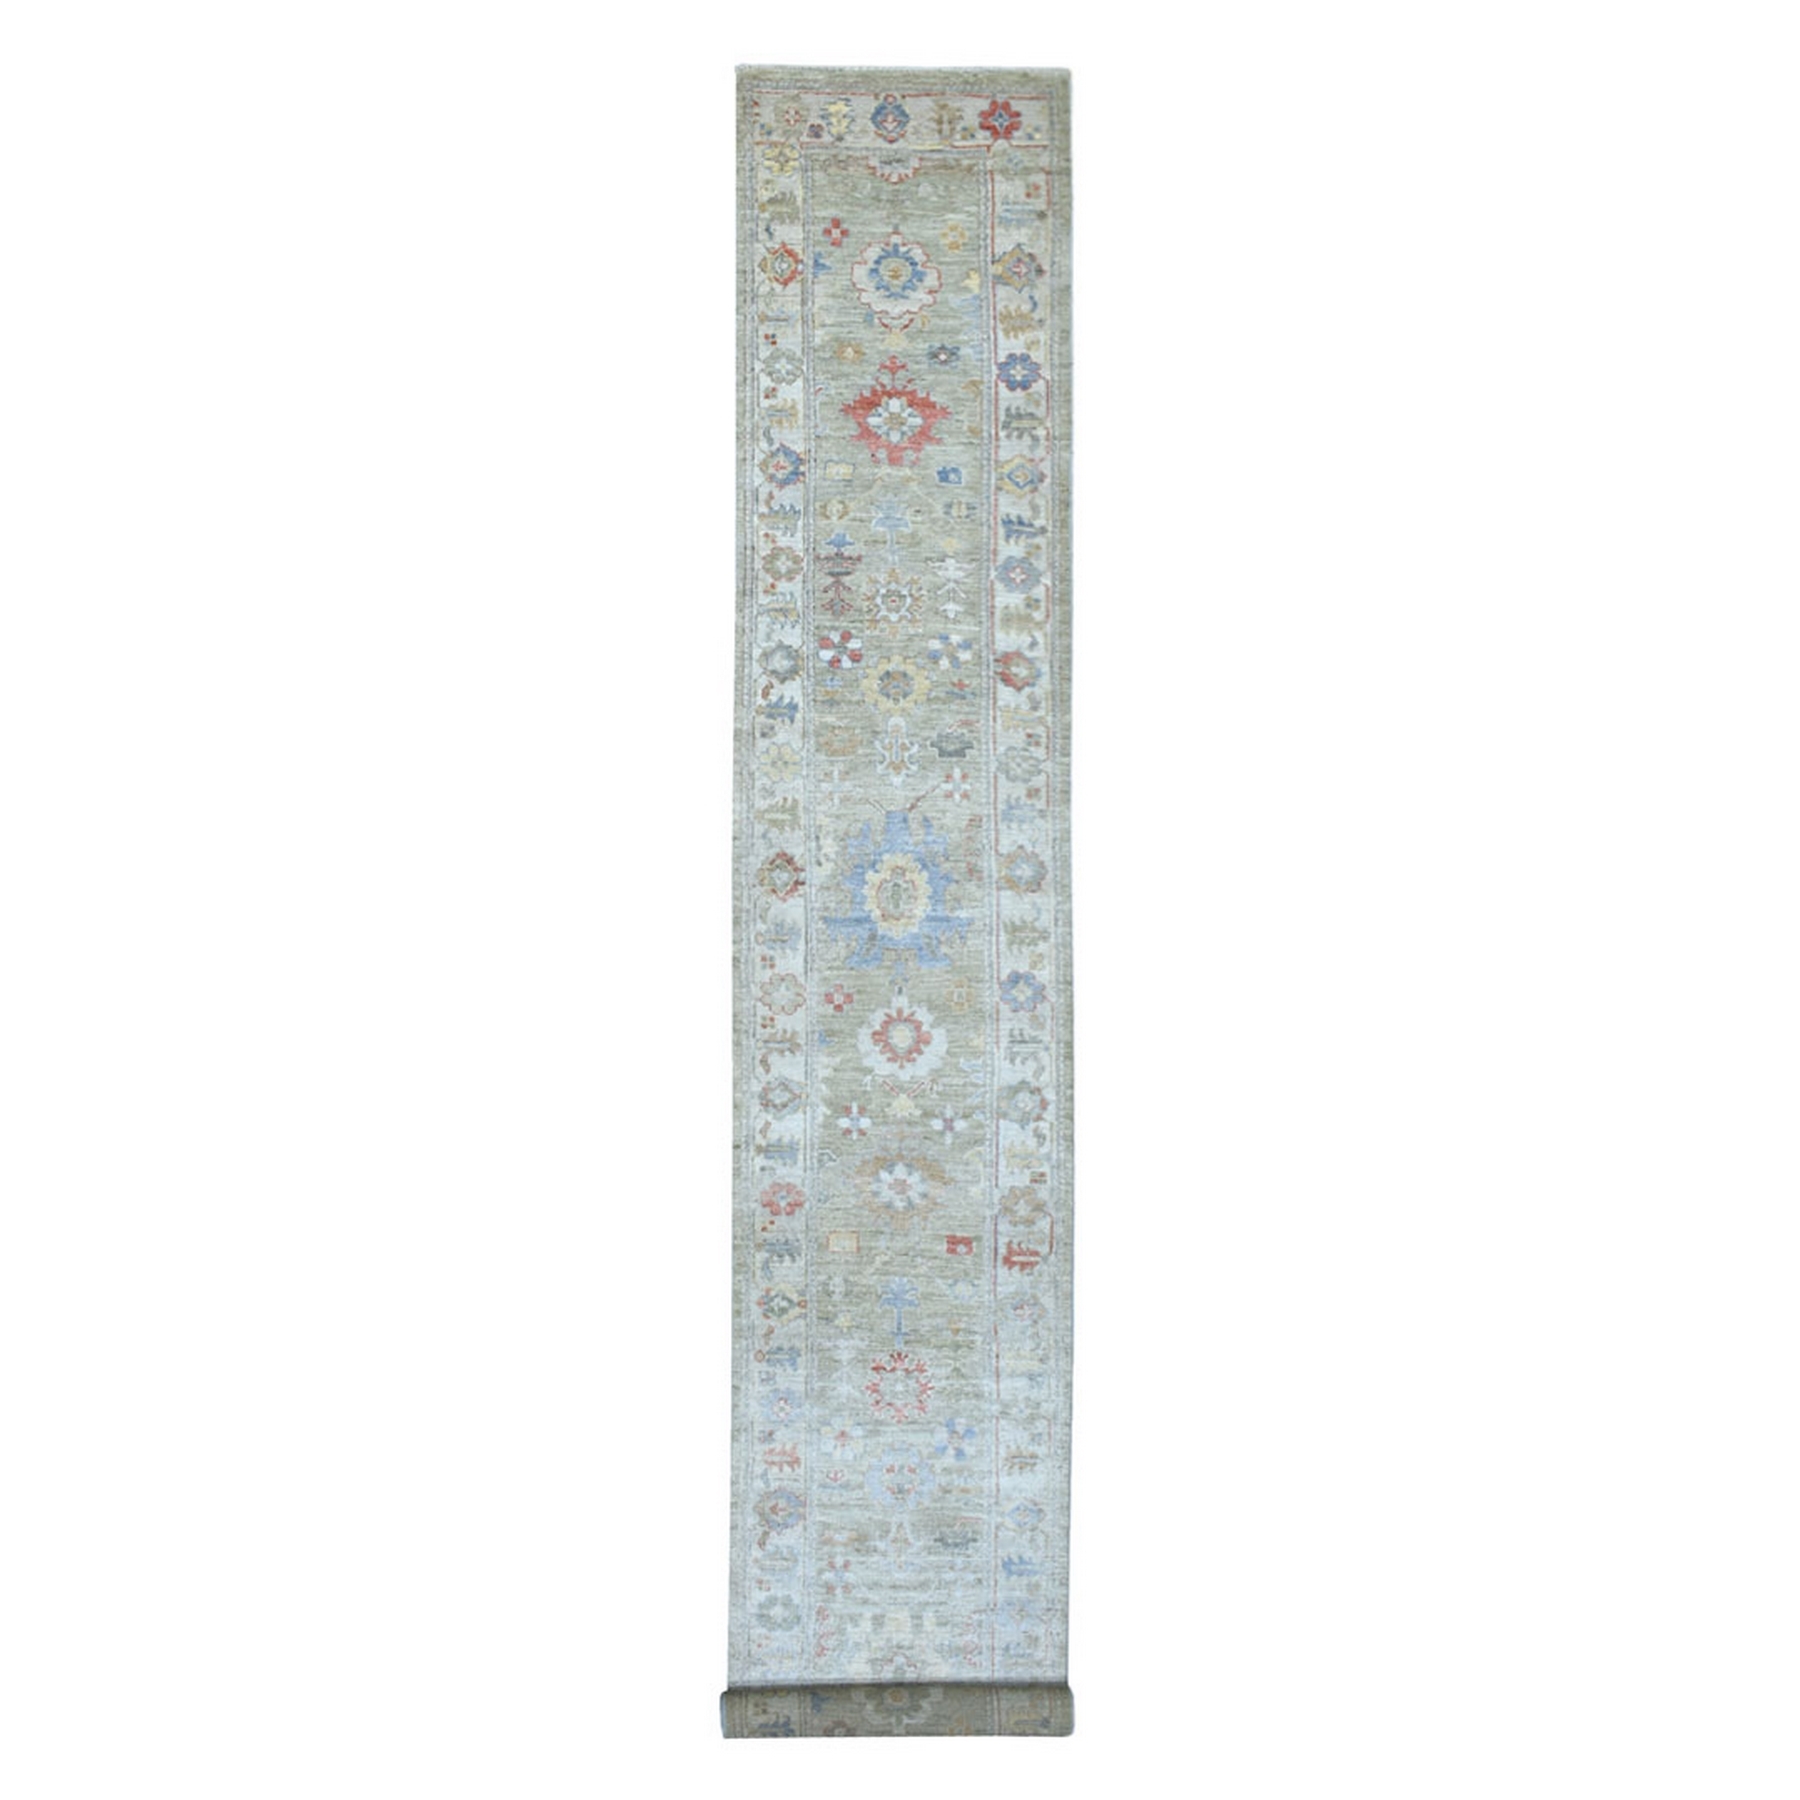 2'7"x17'5" Hand Woven Angora Oushak with Colorful Motifs Gray Extra Soft Wool Oriental XL Runner Rug 